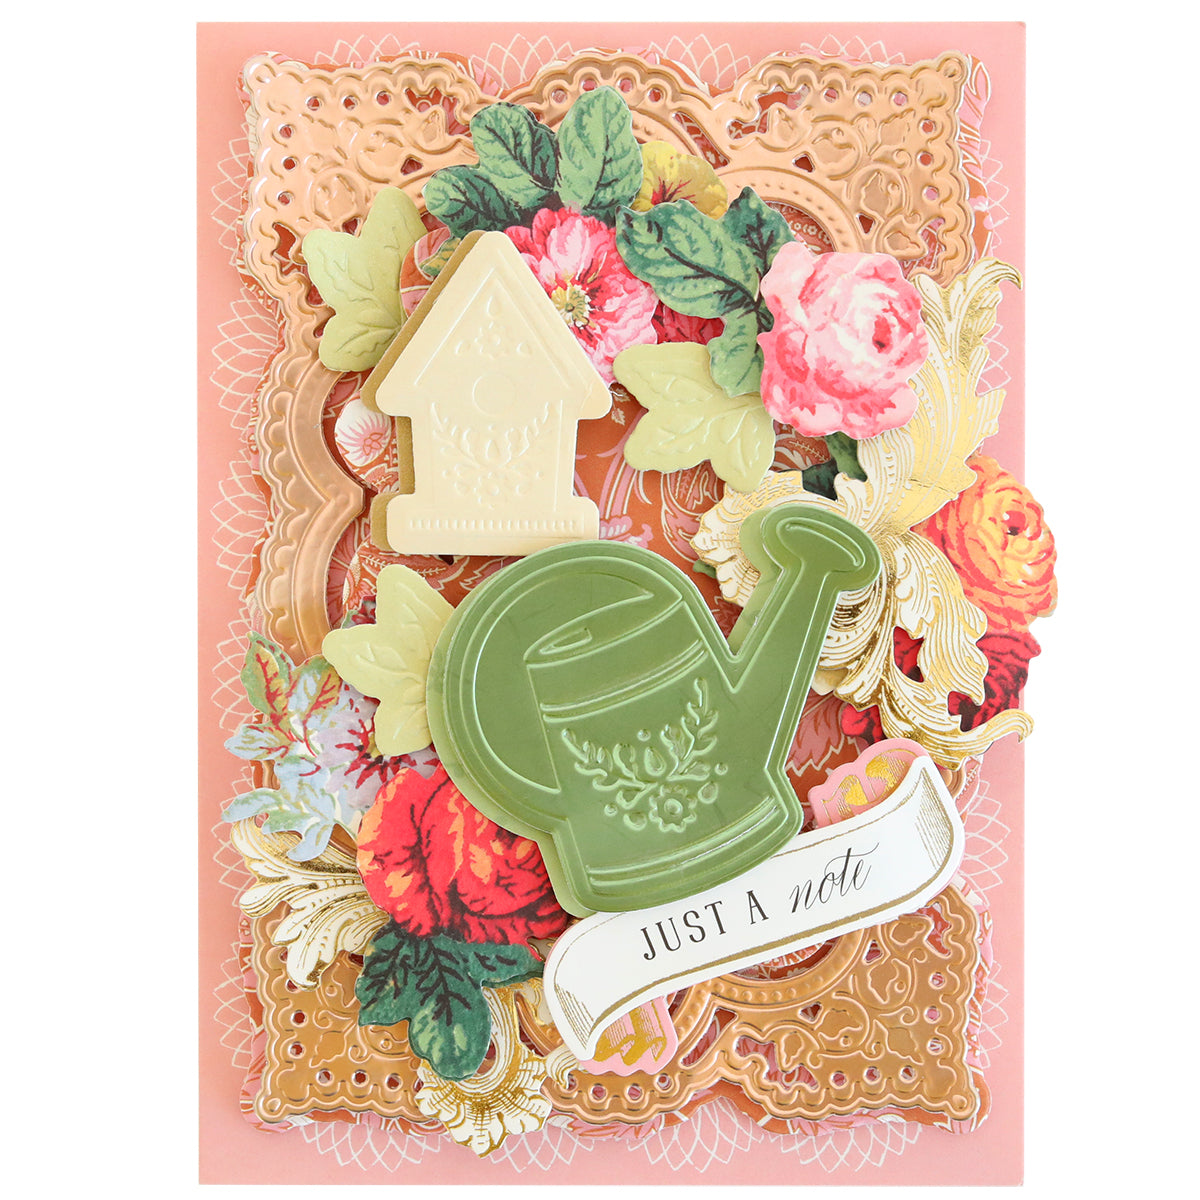 Handmade greeting card with floral designs, a watering can, and a house, featuring the phrase "just a note" and gardening embellishments using the Garden Icons Cut and Emboss Folders.